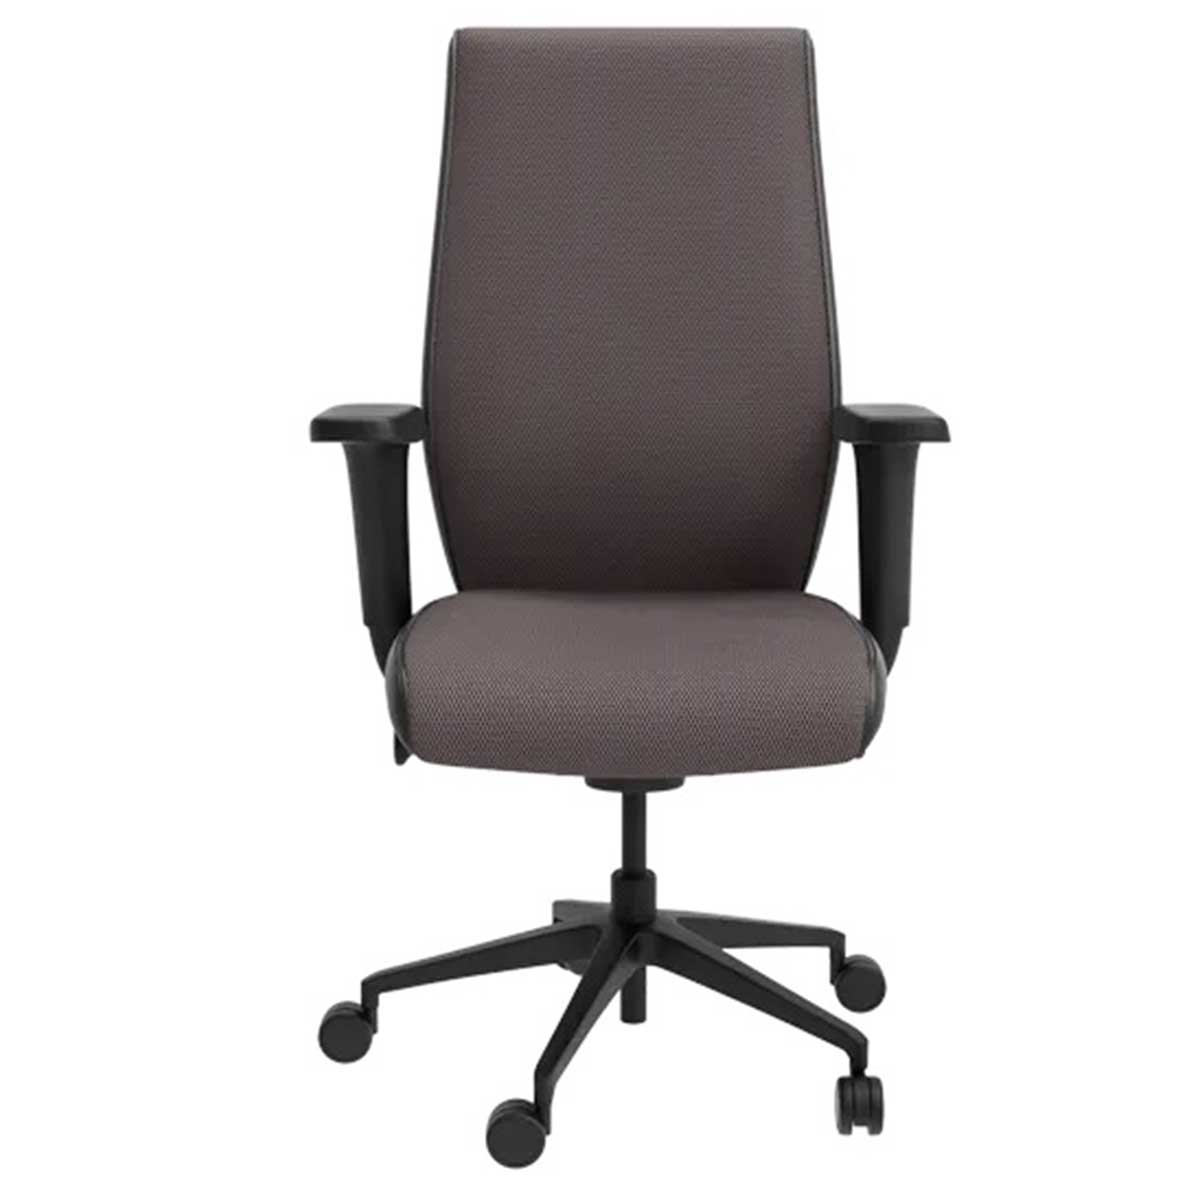 Workstation Chair Manufacturers, Suppliers in Rohini Sector 34